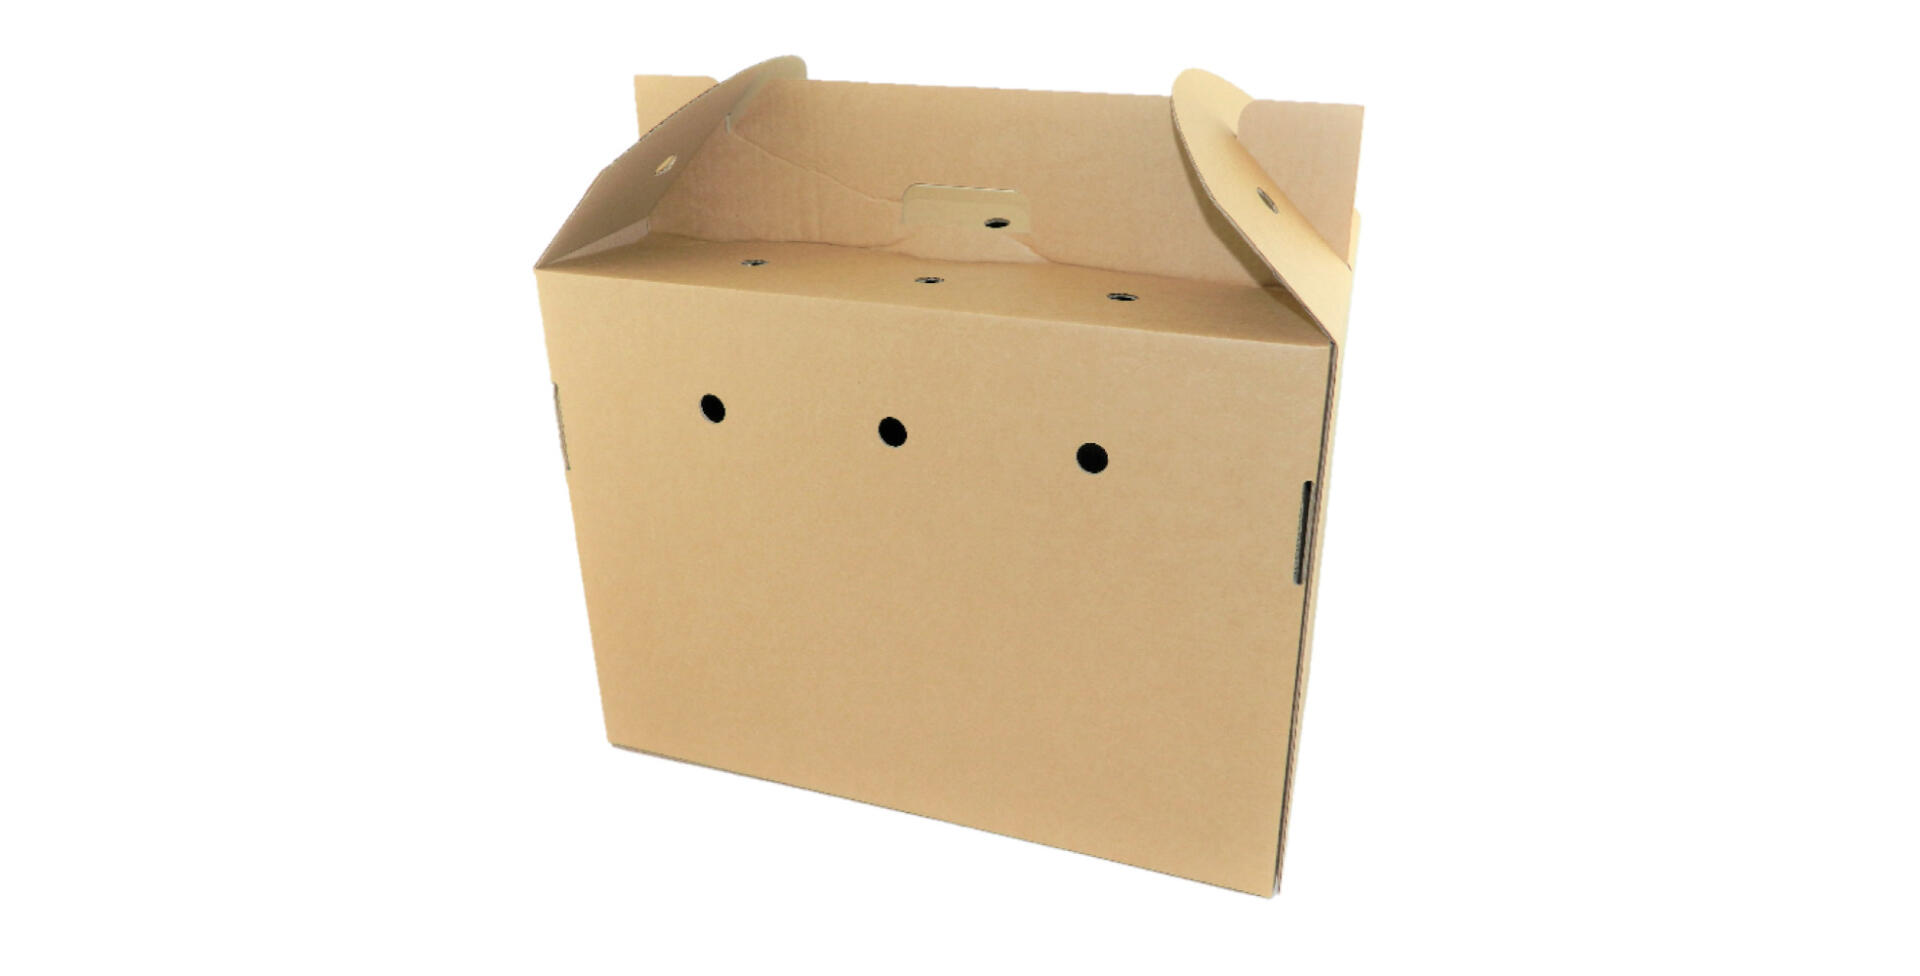 Cardboard Small Animal Carrying Box (Suitable for Poultry) - 10 Pack